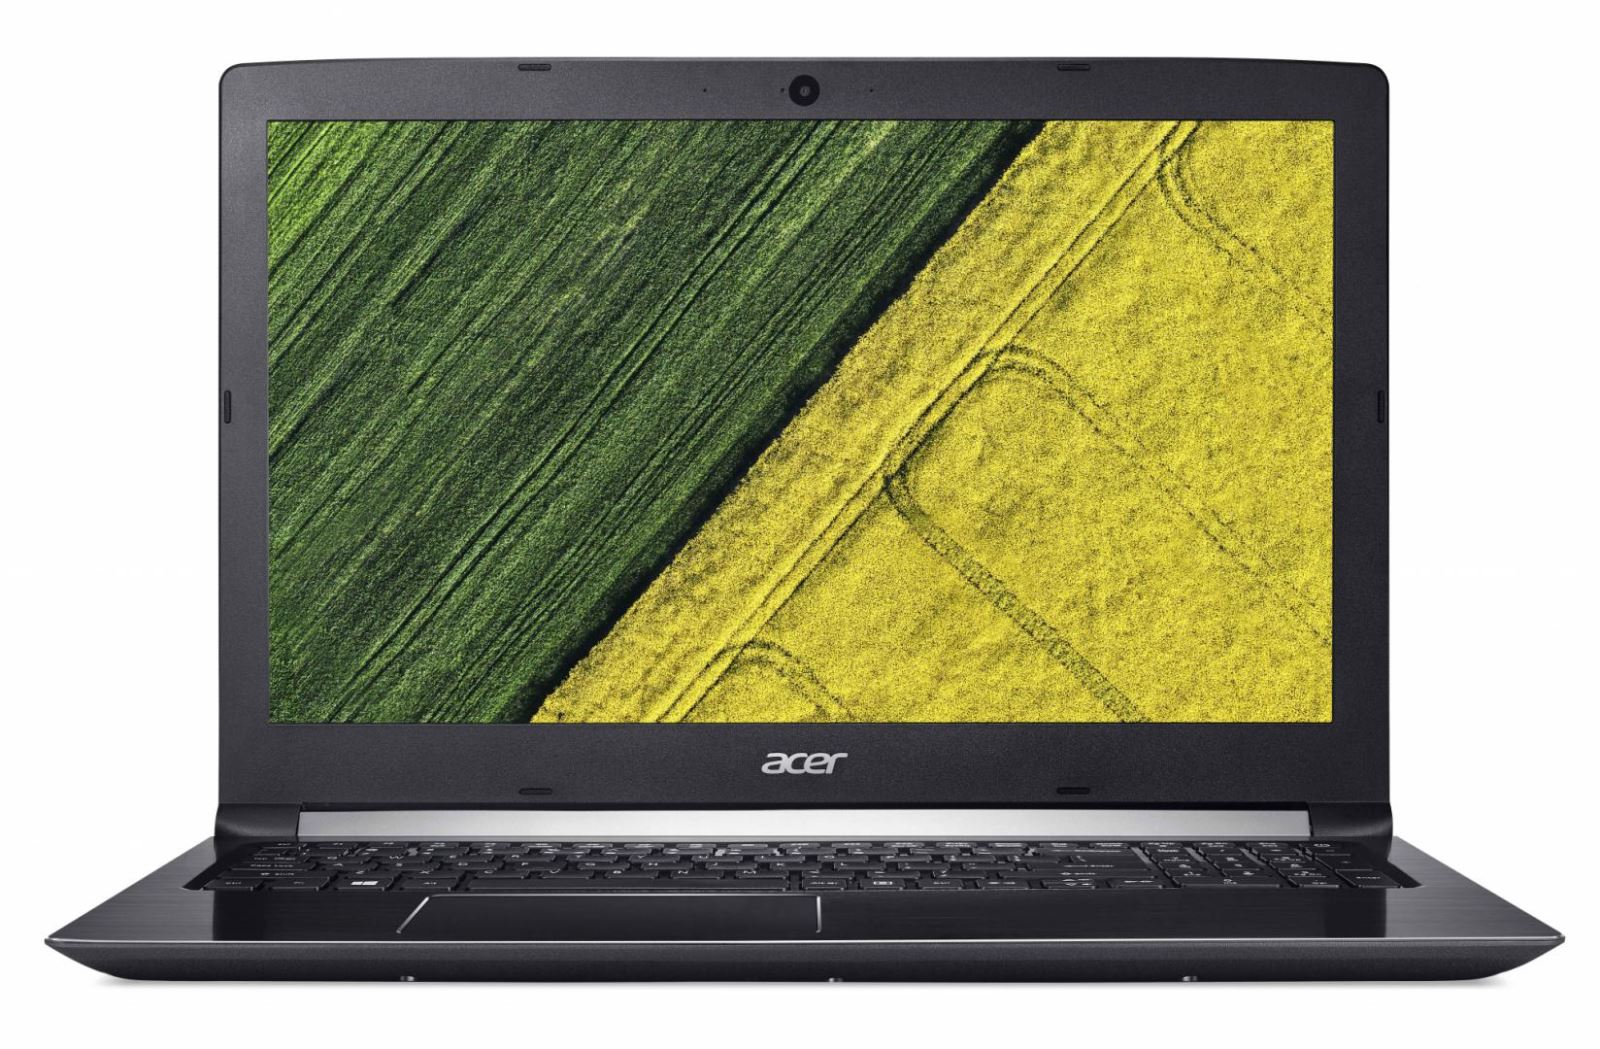 Laptop Acer Aspire 5, A515-51G-84NJ, 15.6" FHD ComfyView IPS LED Non-Glare, Intel Core I7-8550U, nVidia GeForce MX150 2GB, RAM 4GB DDR4, HDD 1TB, Boot-up Linux, Silver